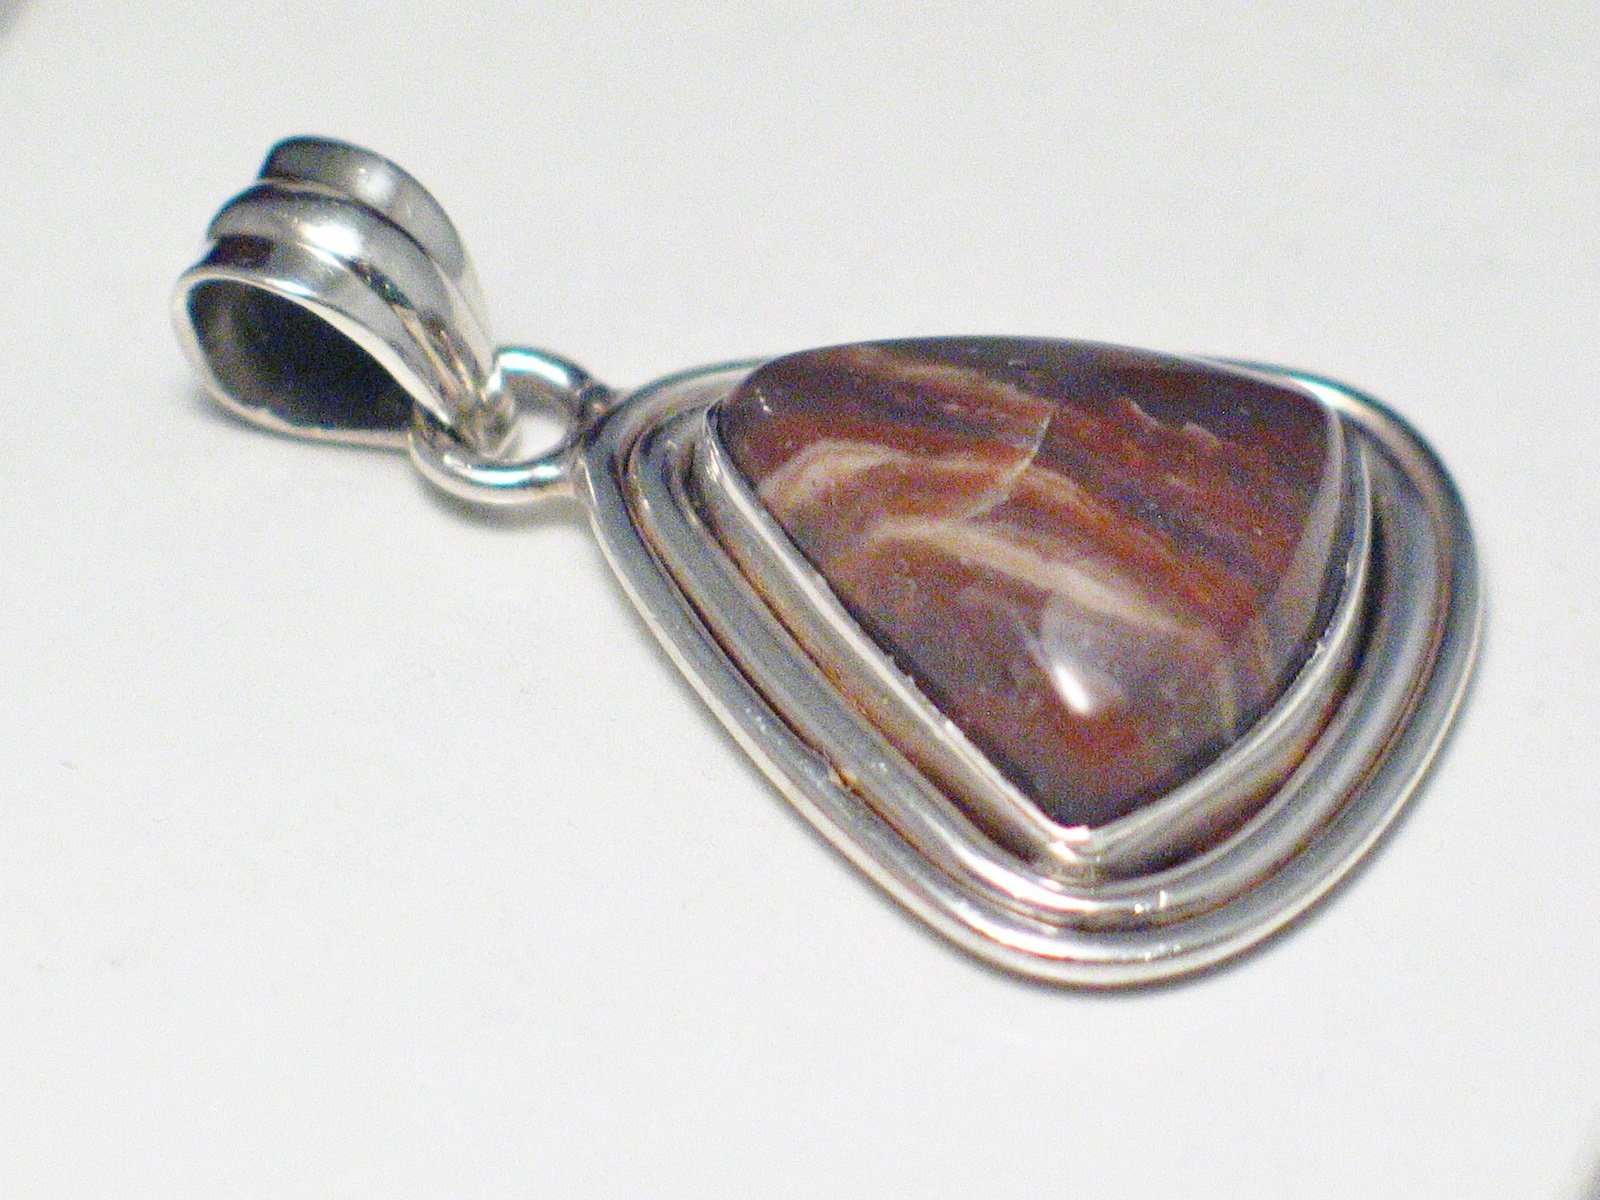 Affordable Jewelry | Sterling Silver Mocha Brown Stone Pendant